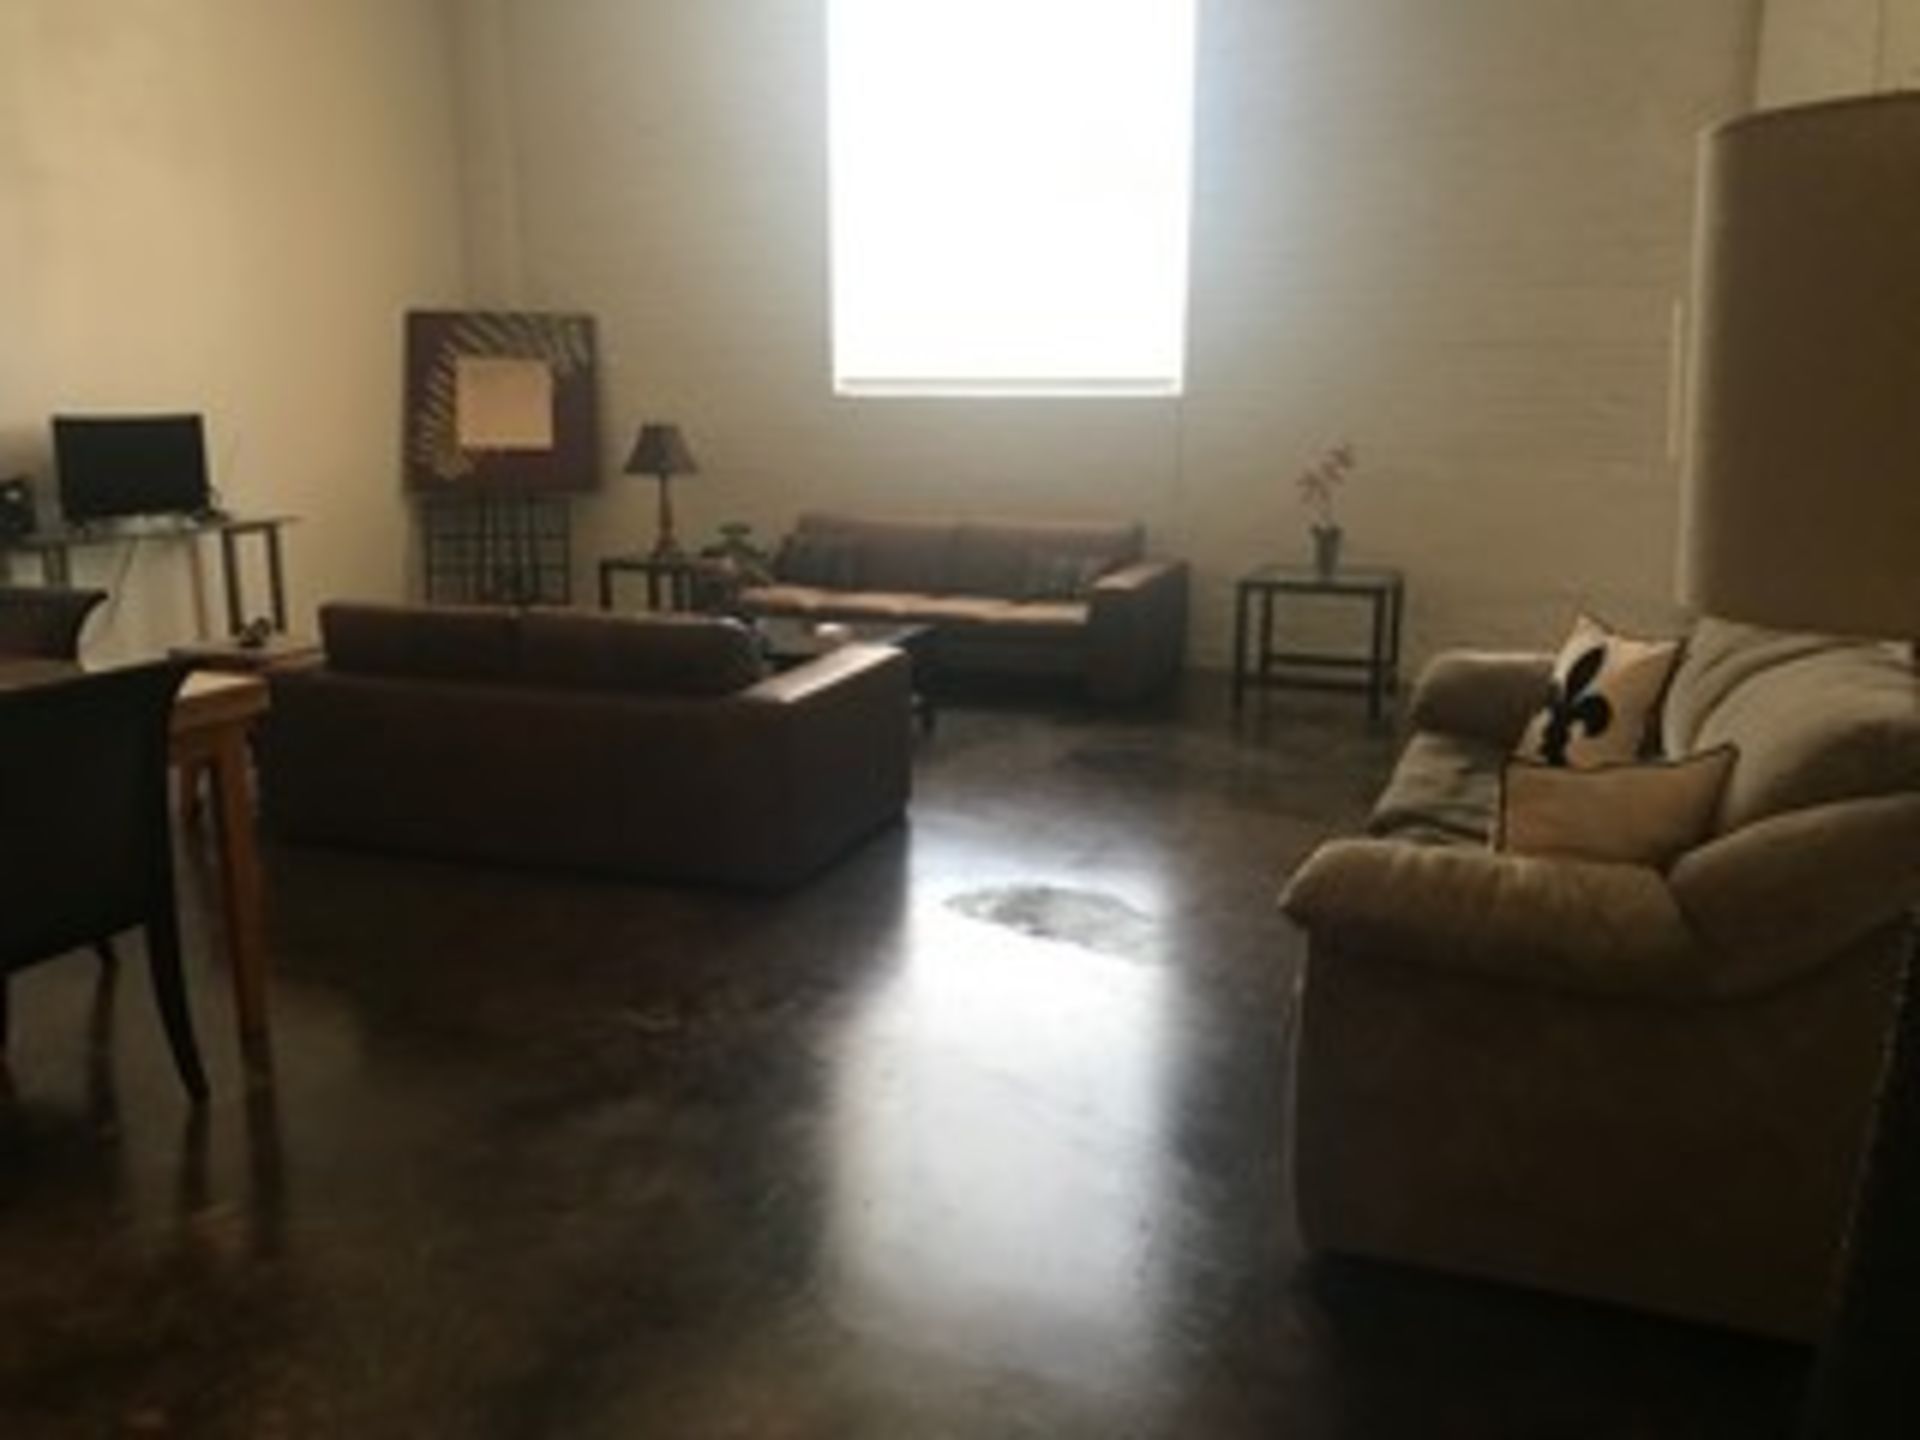 LOT CONTENTS OF CONDO - NO APPLIANCES (LOCATED IN NEW ORLEANS, LA) - Image 5 of 9